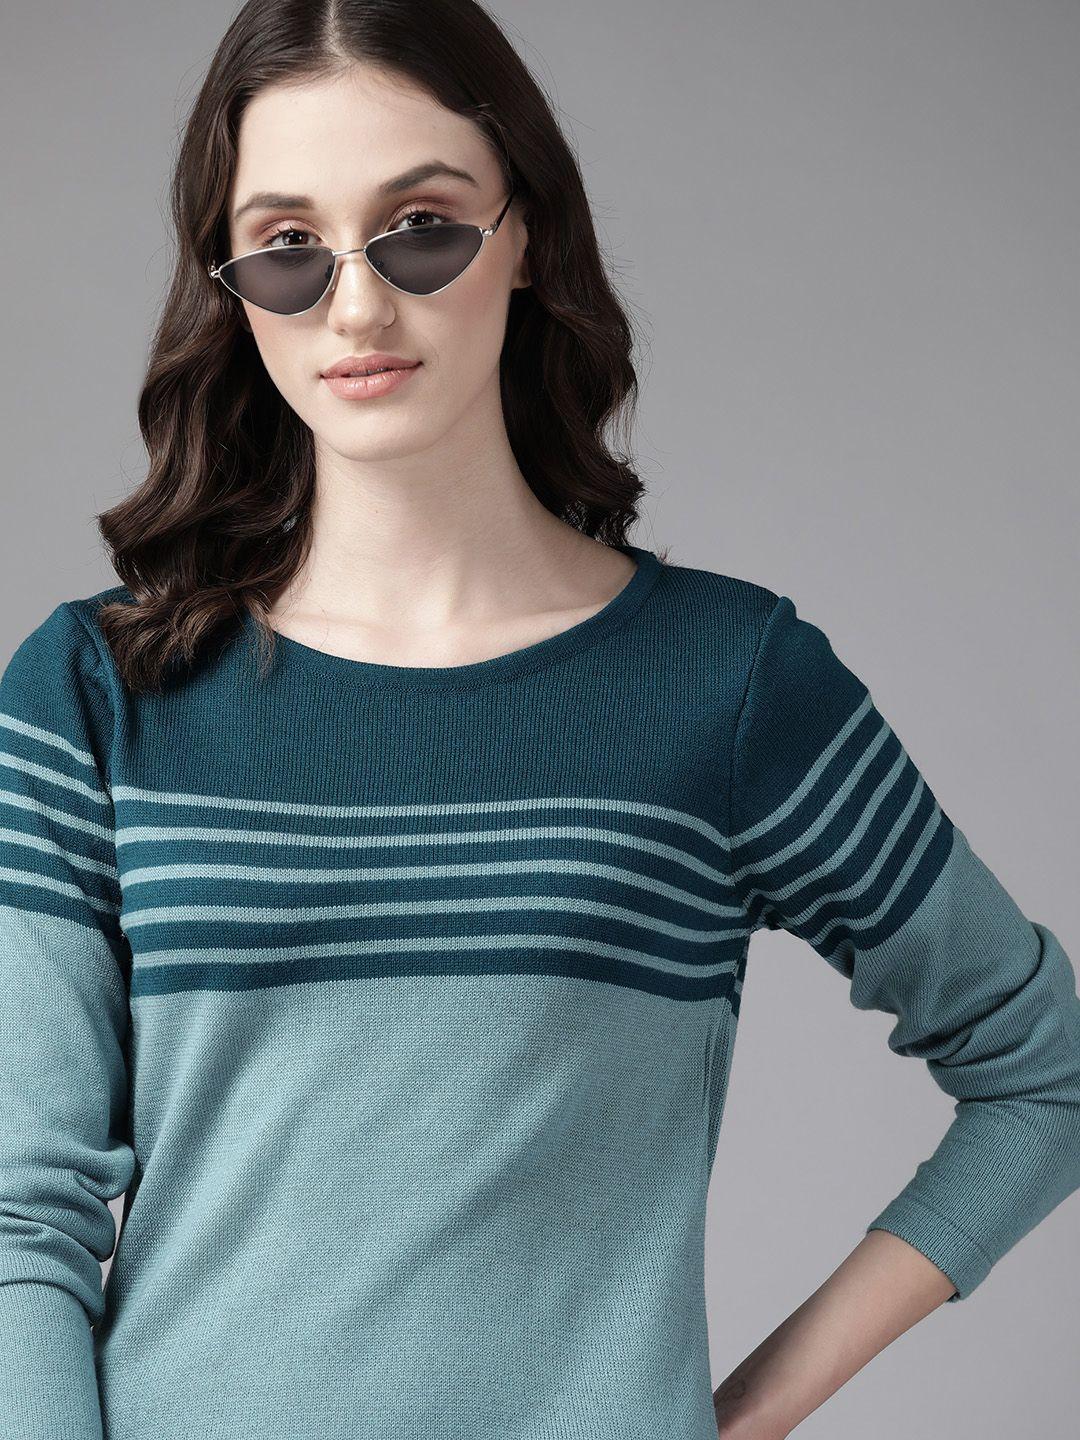 the roadster lifestyle co. women teal green & blue acrylic striped pullover